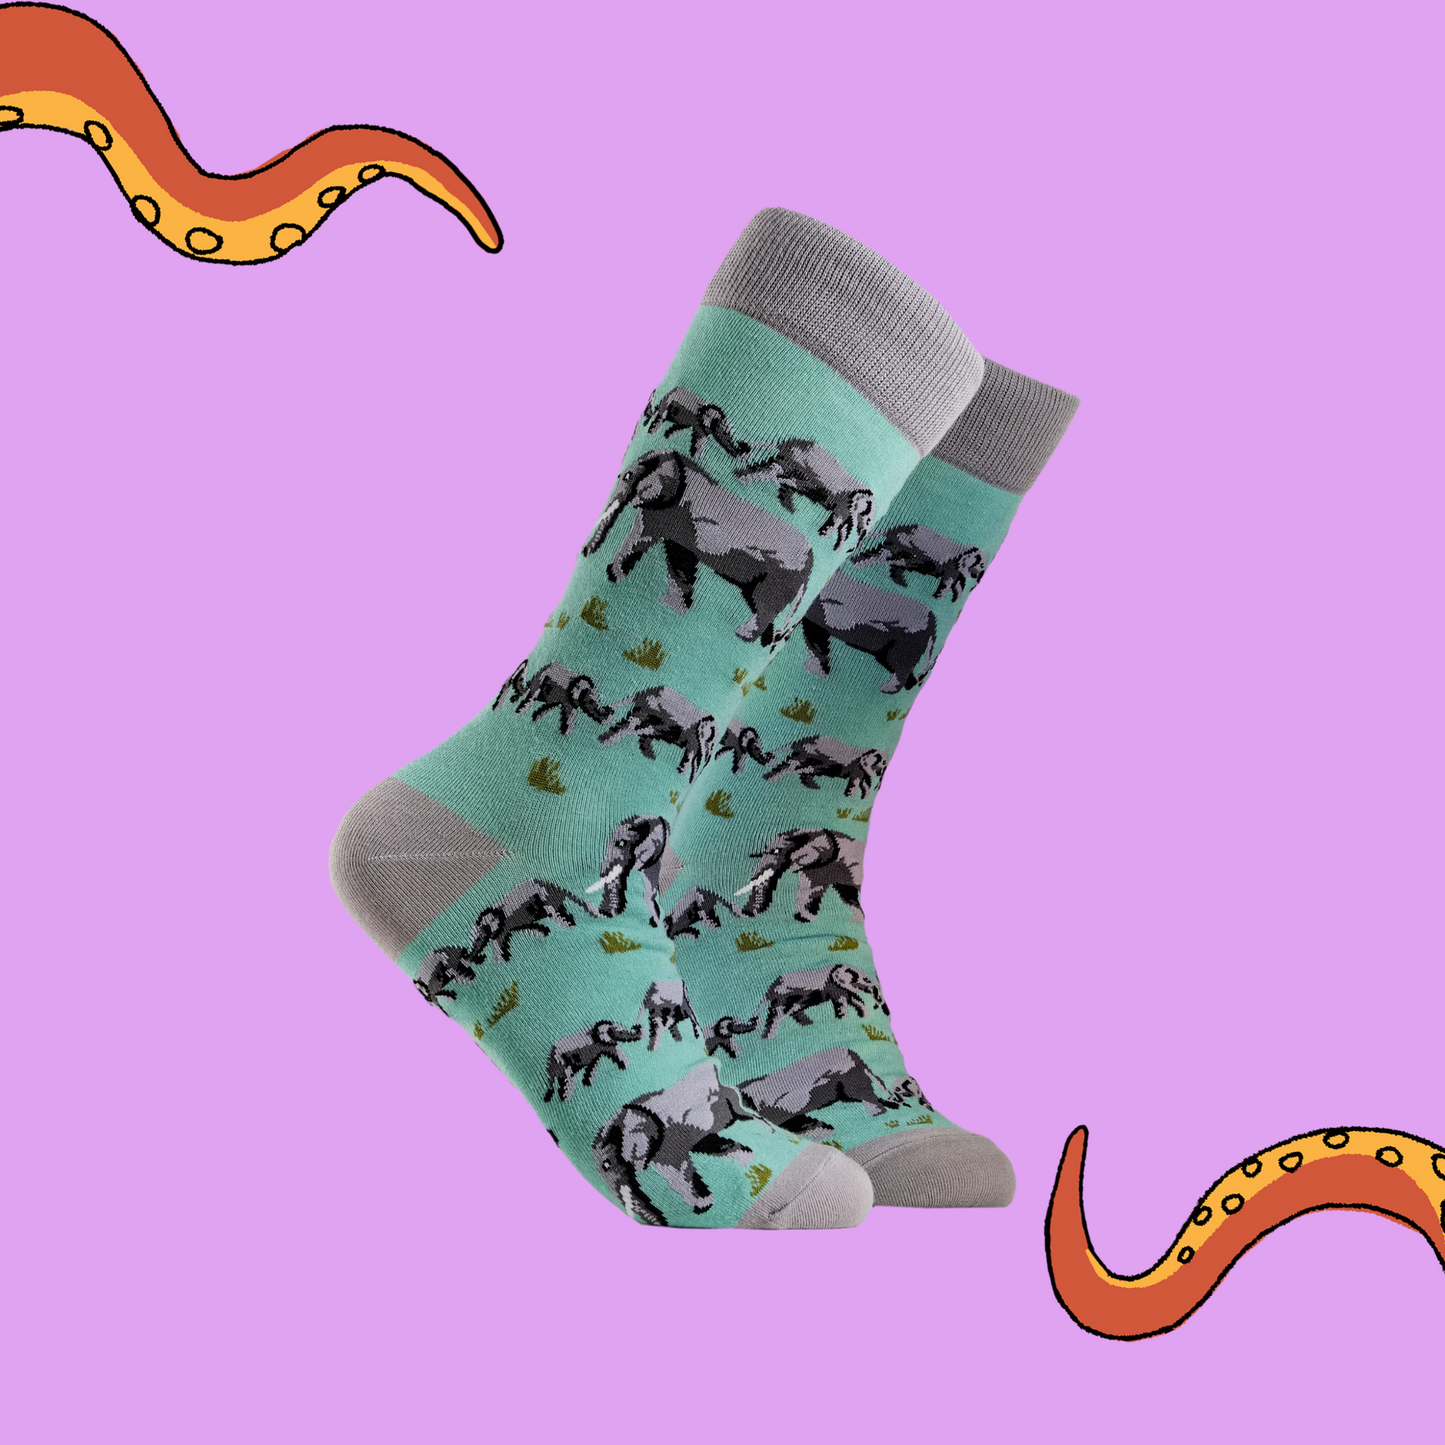 A pair of socks depicting elephants. Turquoise legs, grey cuff, heel and toe.